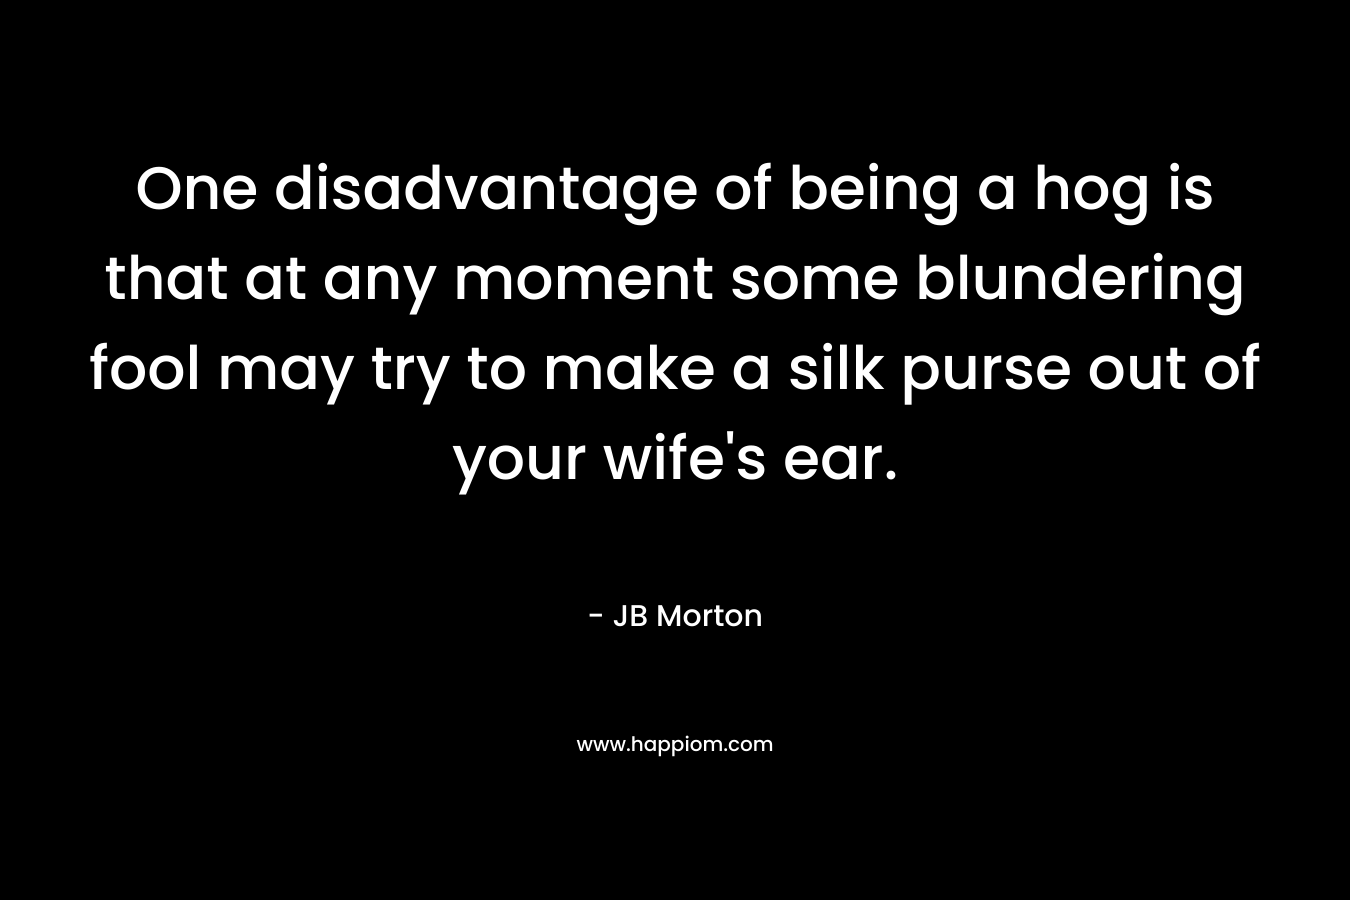 One disadvantage of being a hog is that at any moment some blundering fool may try to make a silk purse out of your wife’s ear. – JB Morton